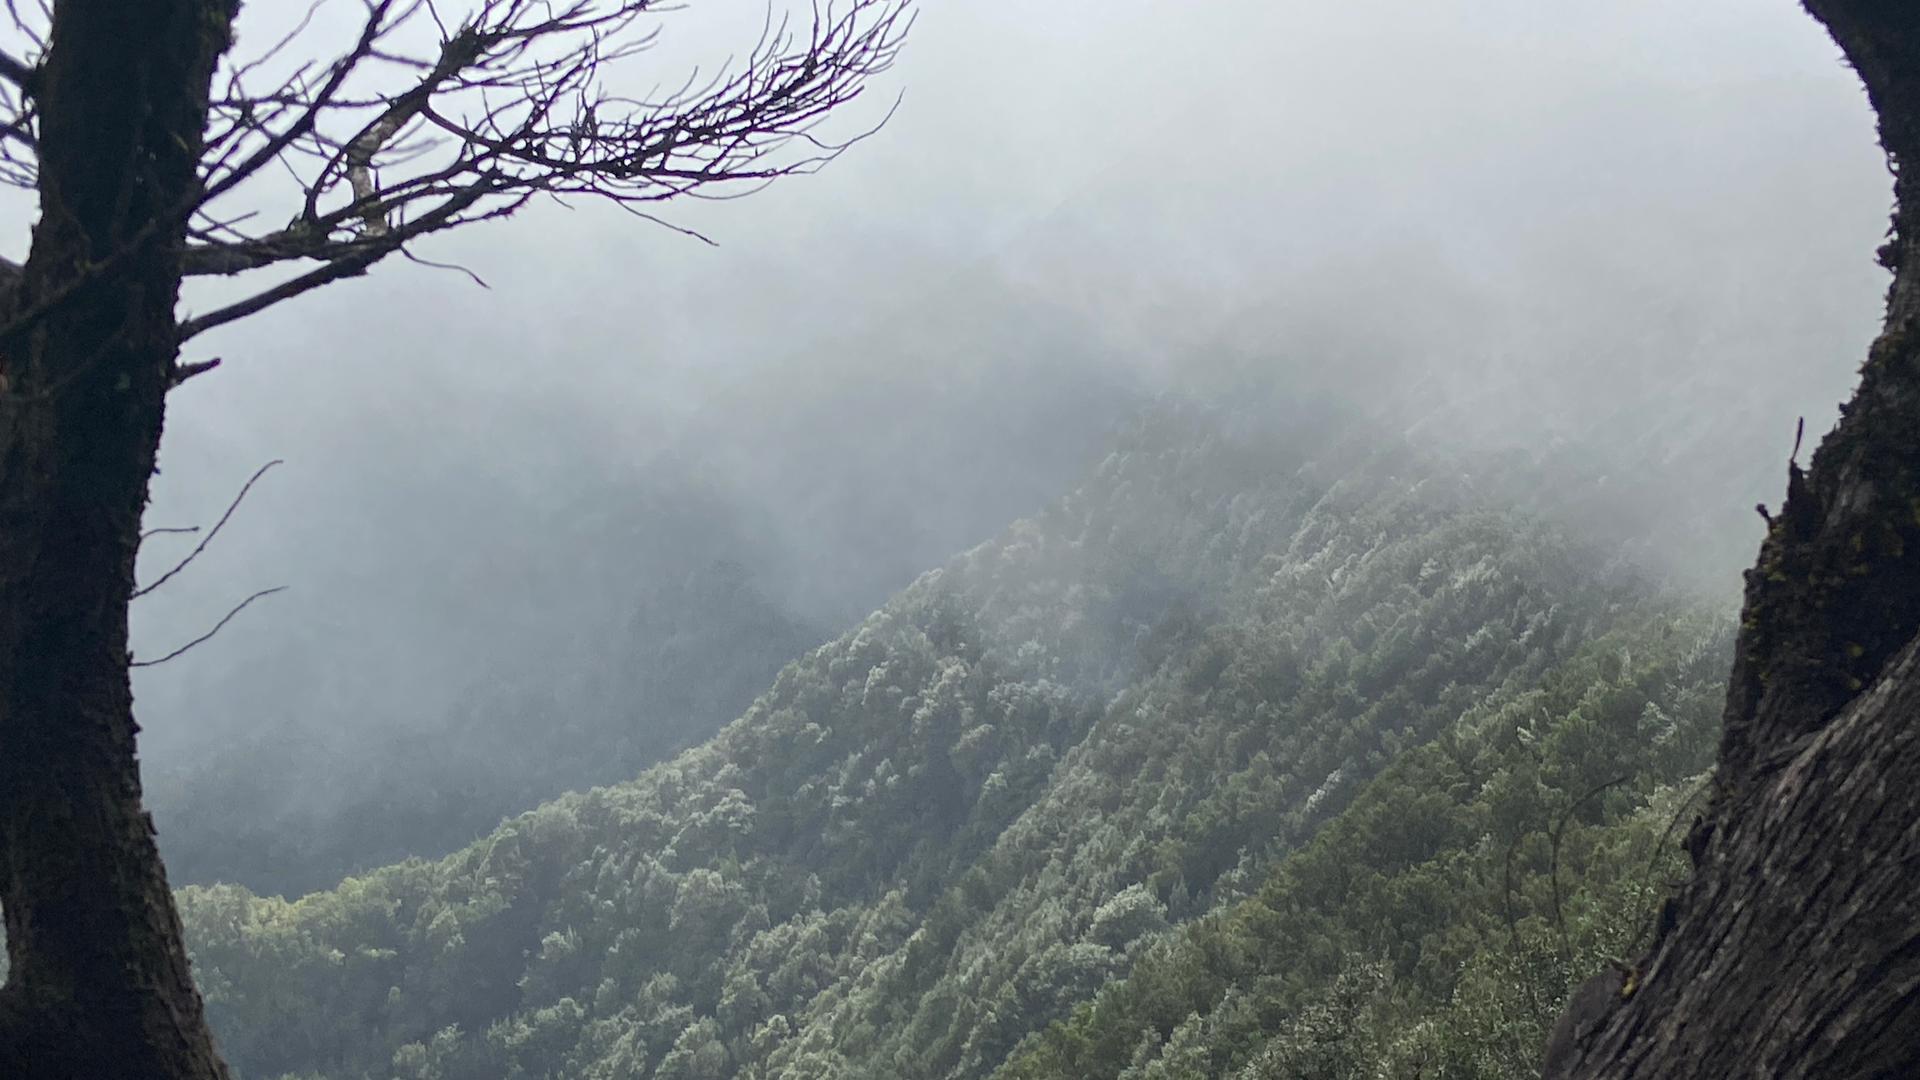 The Laurel Forest is almost always shrouded in mist, as clouds coming off the Atlantic collide with the high mountains.